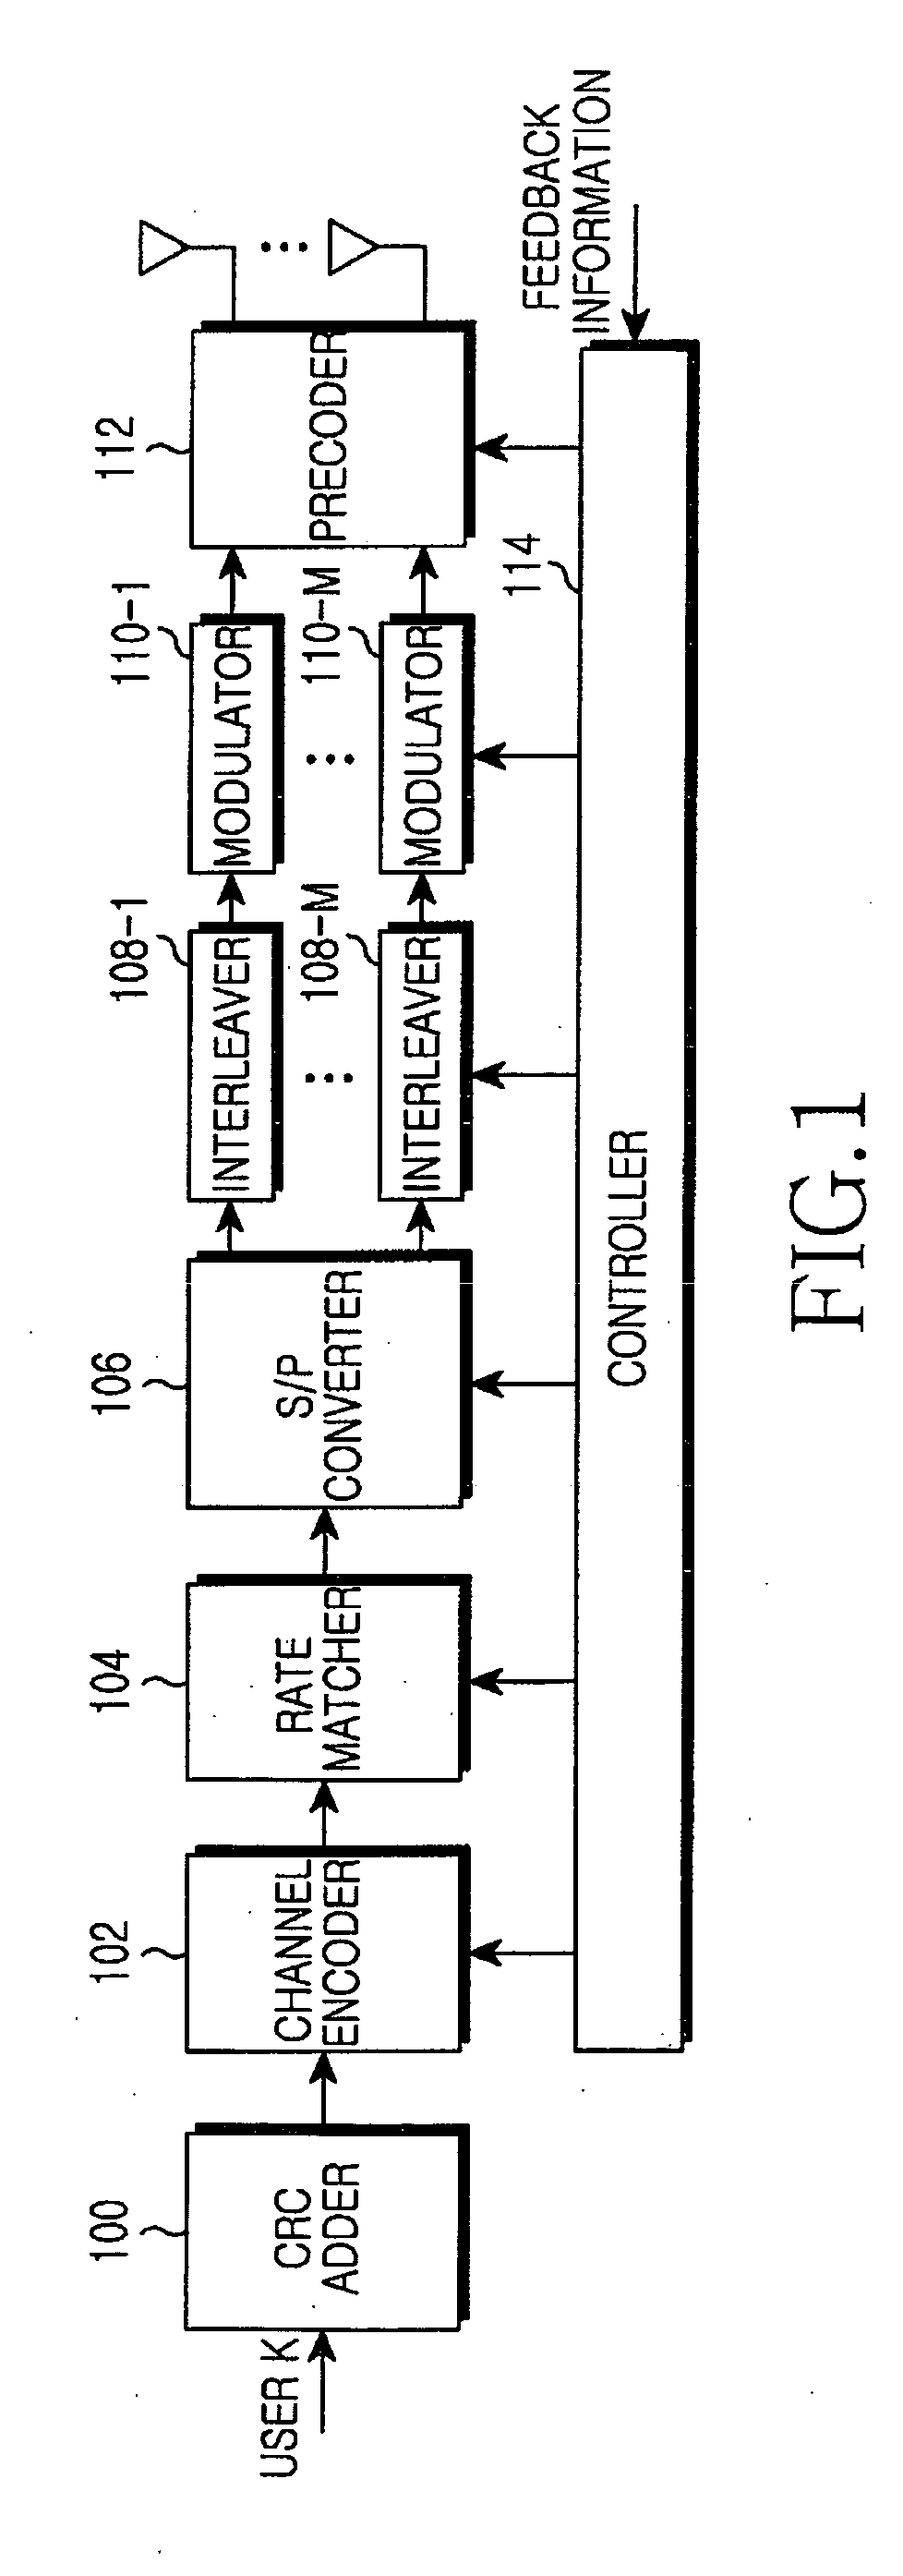 Transmitting/receiving apparatus and method for interleaver division multiple access system